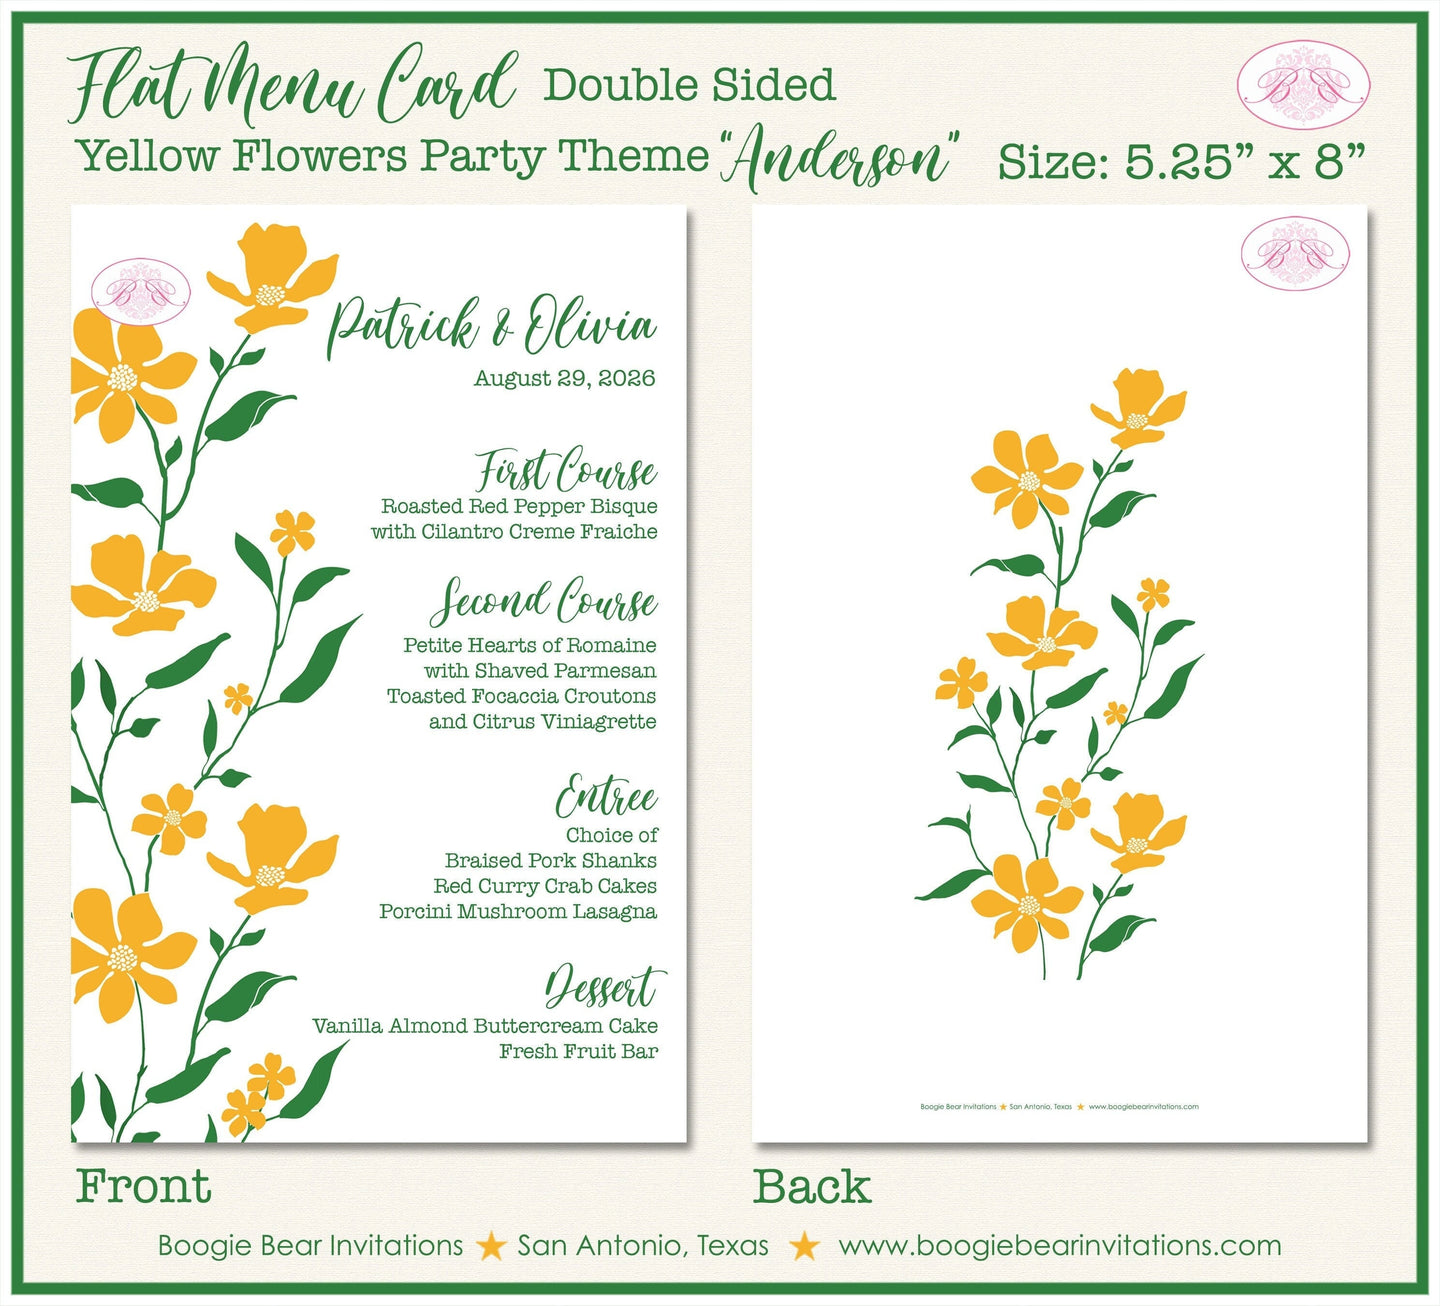 Yellow Flowers Wedding Menu Cards Party Food Entree Plate Dinner Green Garden Grow Boogie Bear Invitations Anderson Theme Paperless Printed